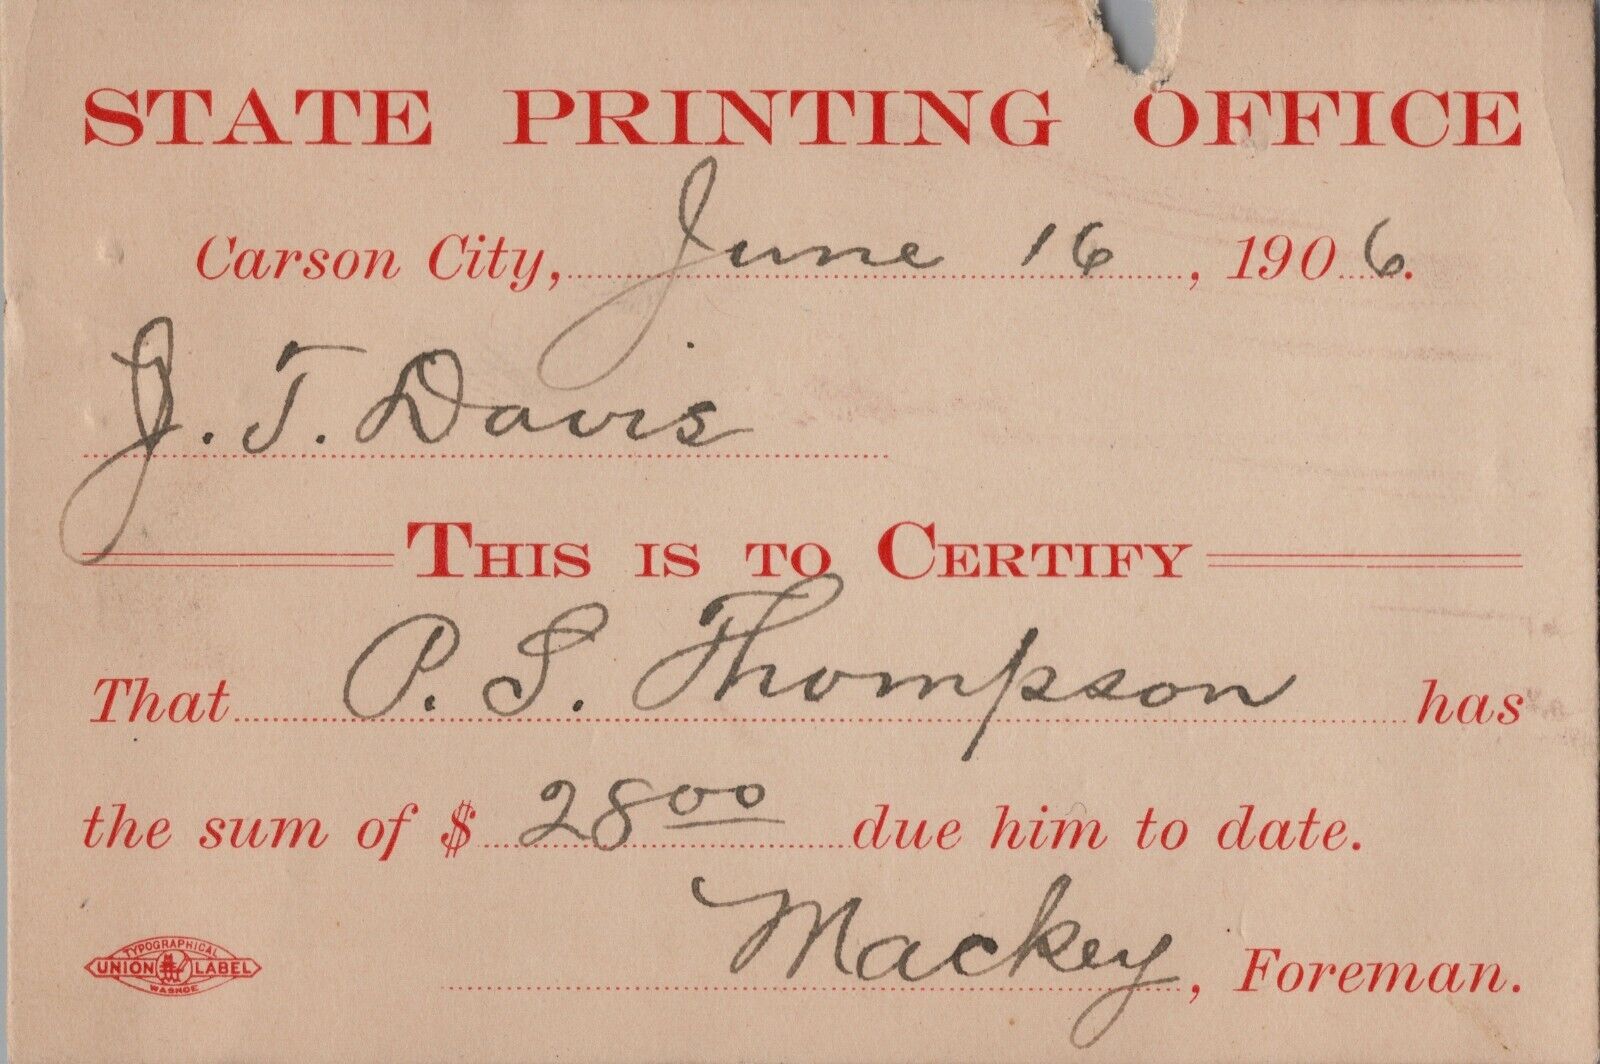 1906 State Printing Office Payment Receipt Card - Carson City, Nevada